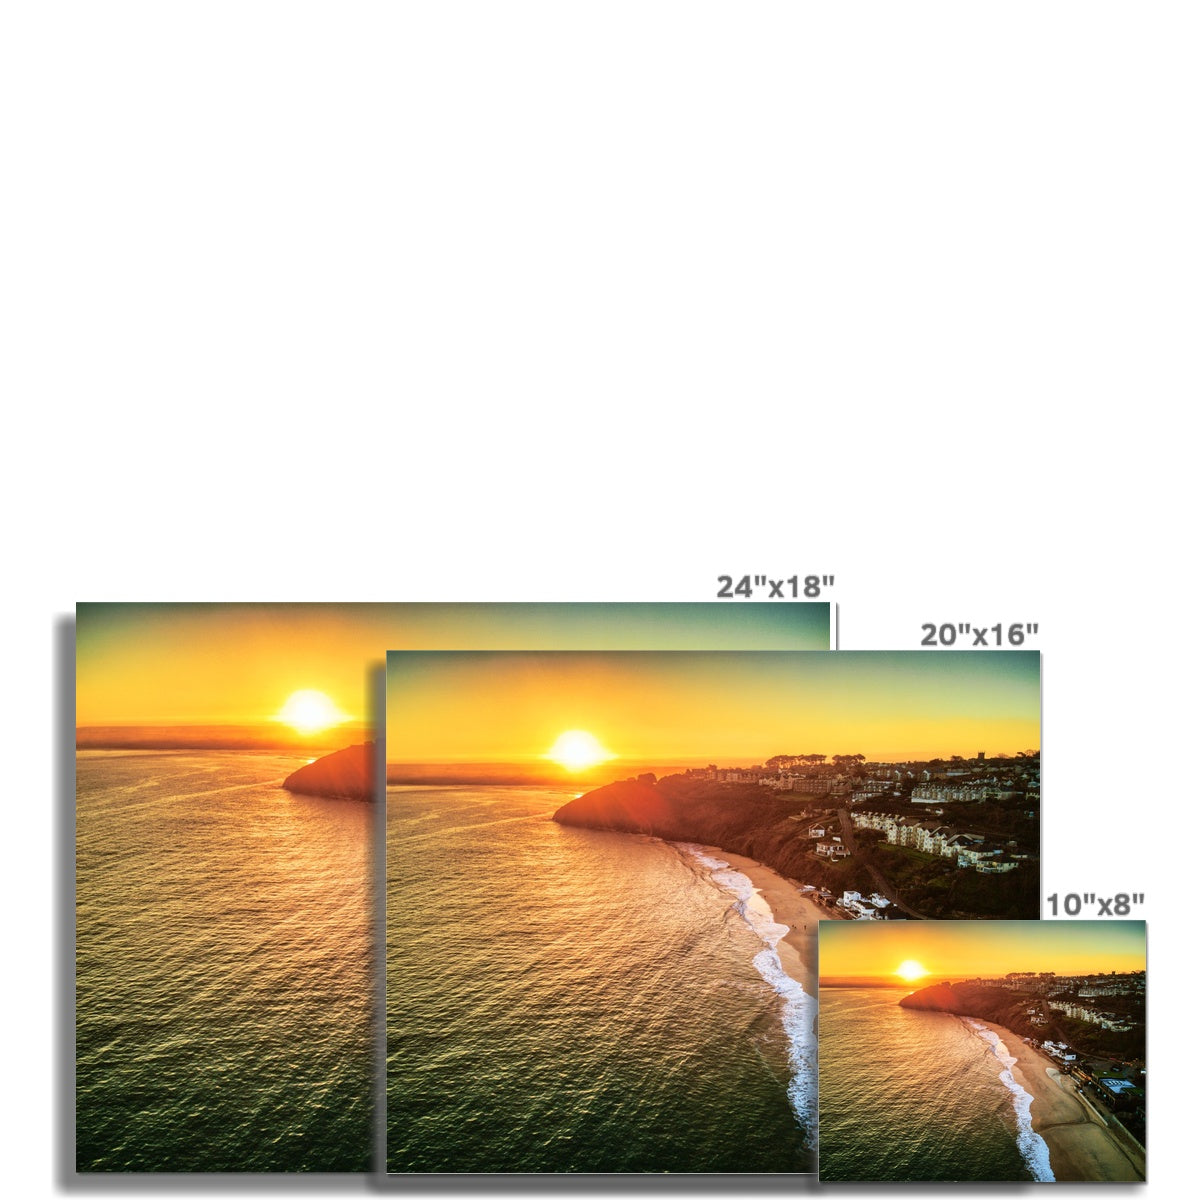 carbis bay dawn picture sizes